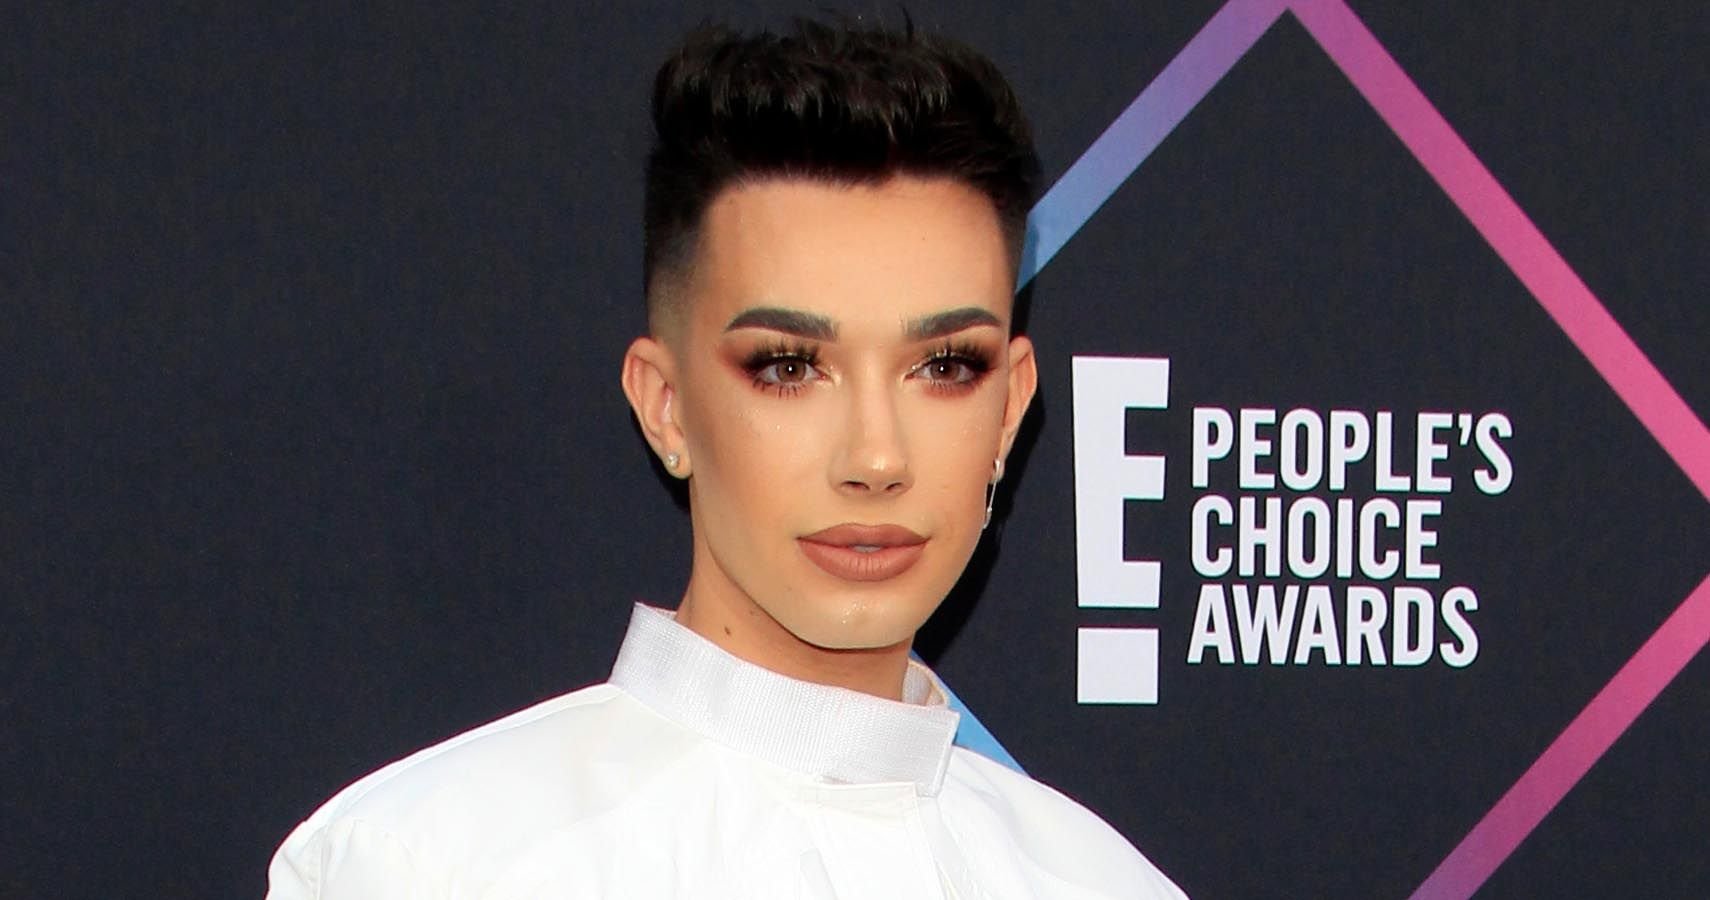 Lost Subscribers, Lost Income: The Price Of The James Charles Scandals